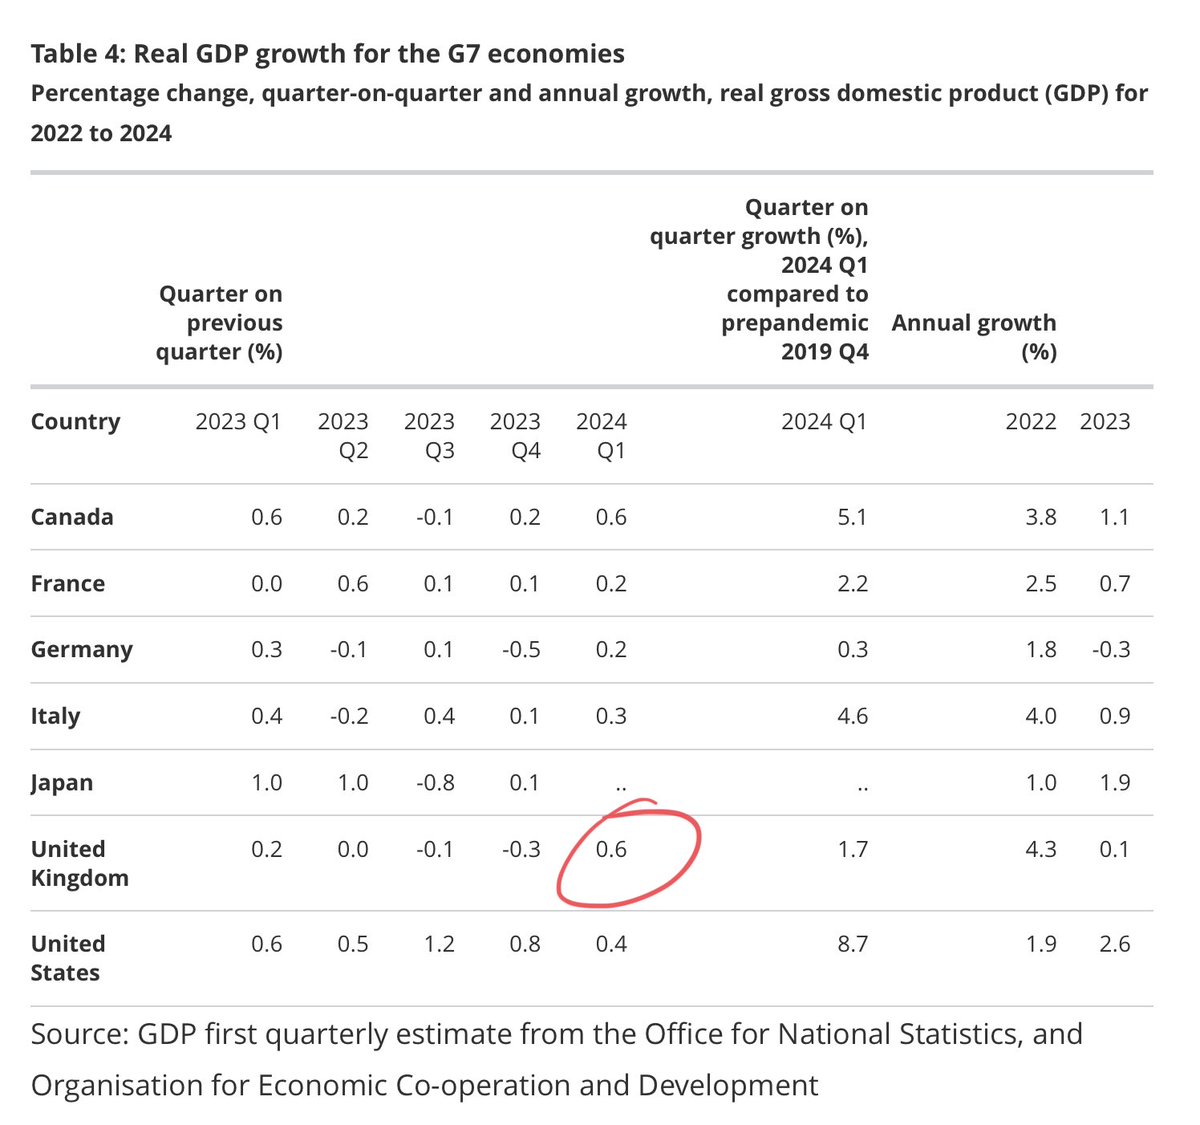 Based on today’s GDP figures, the UK was the joint fastest growing economy in the G7 in the first quarter of 2024. … Though we’ve yet to get Japan’s numbers. And the UK doesn’t look so comparatively great on most of the other columns